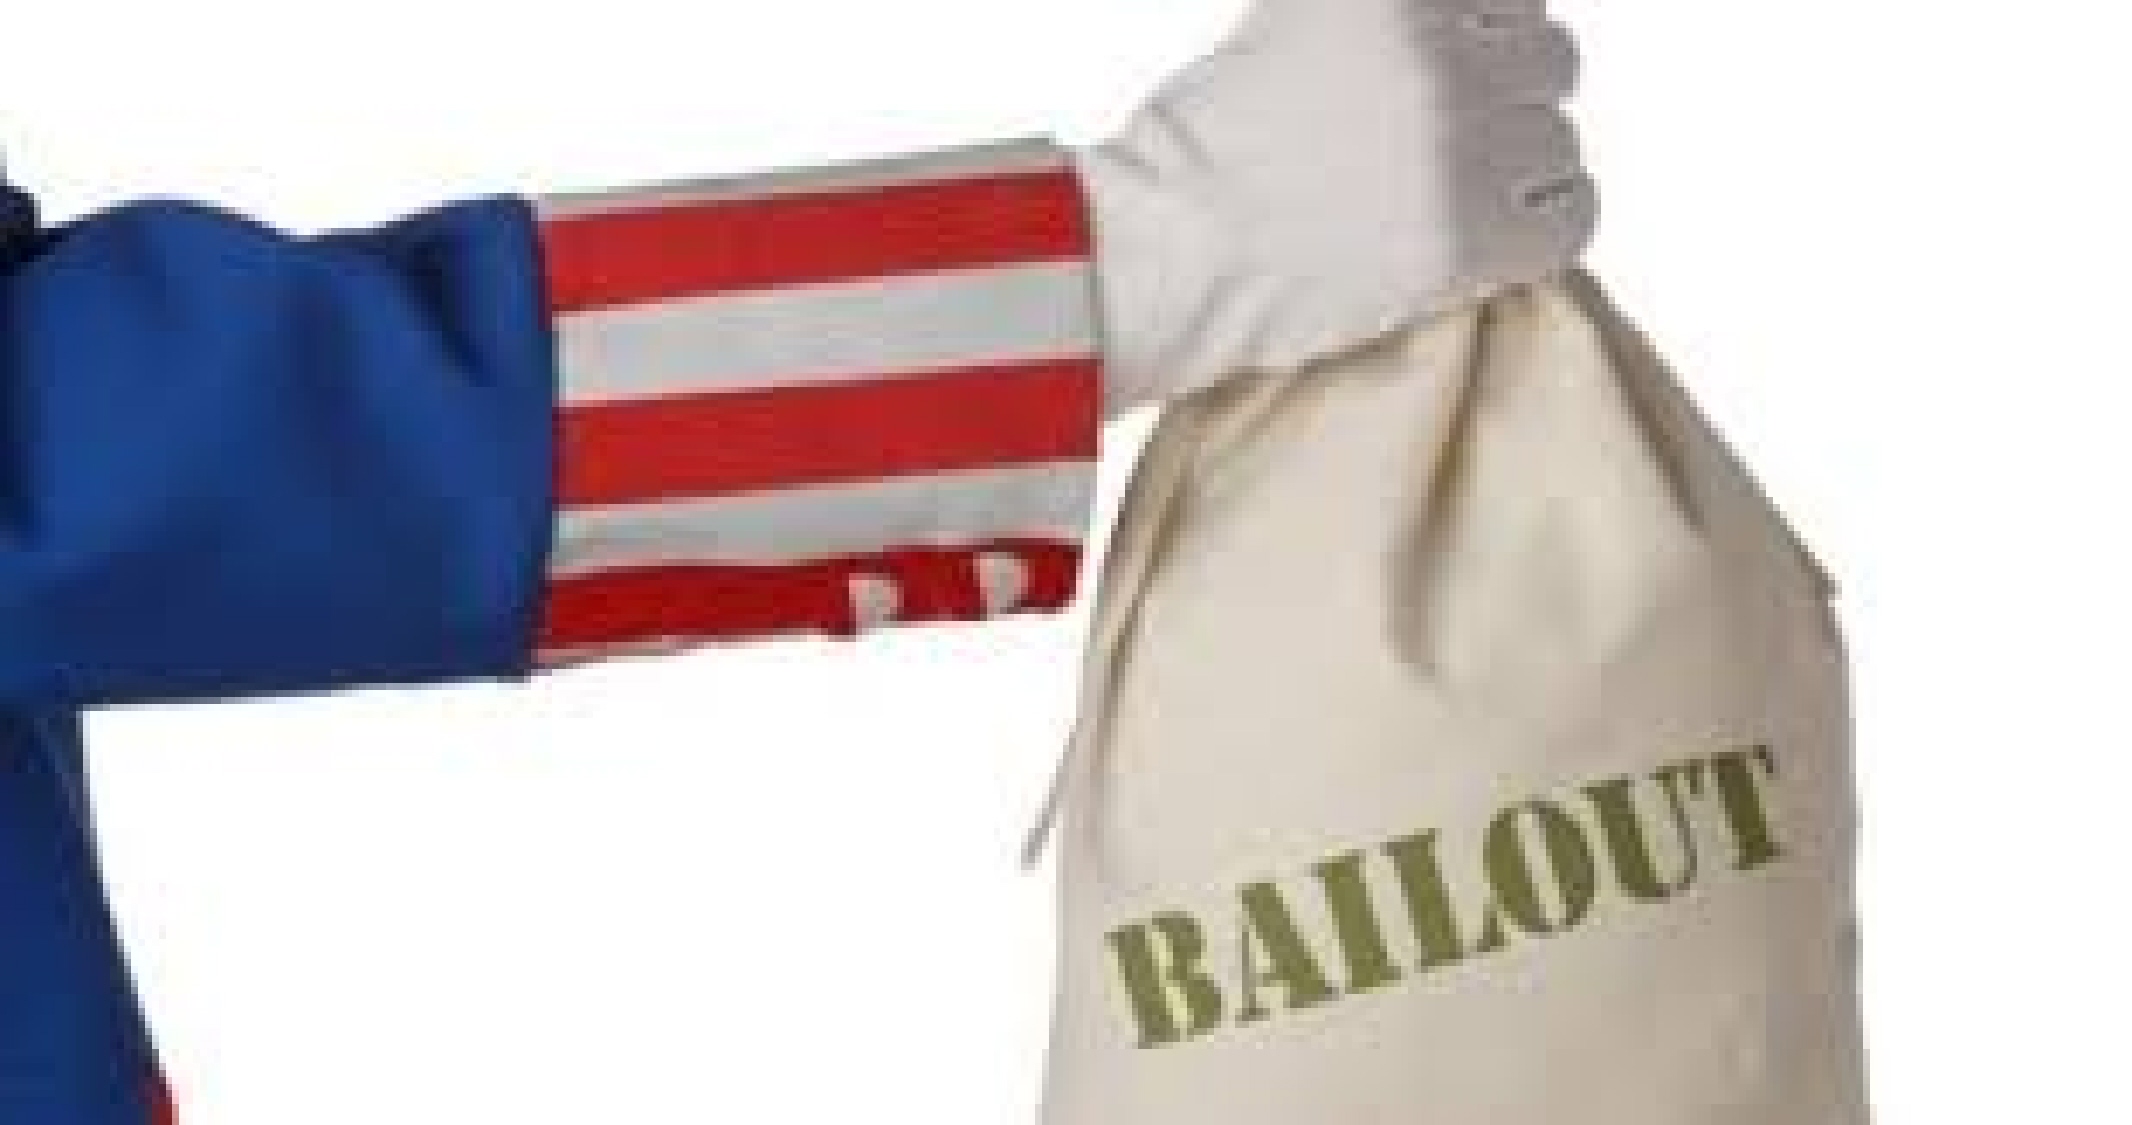 Big 3 Bailout: Why America Needs It